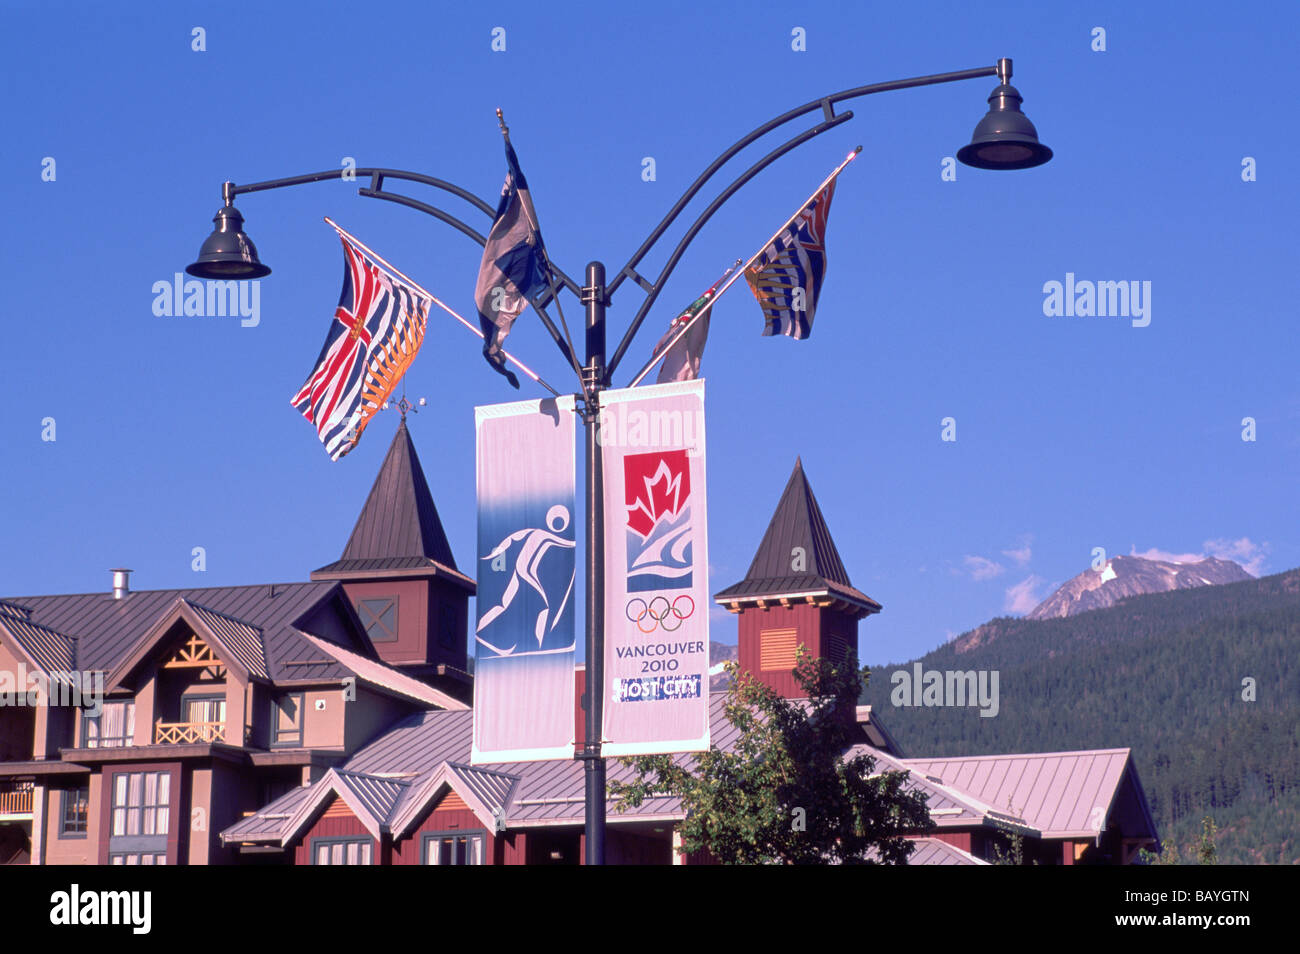 Street Banners announcing the 2010 Winter Olympic Games in Vancouver and Whistler British Columbia Canada Stock Photo